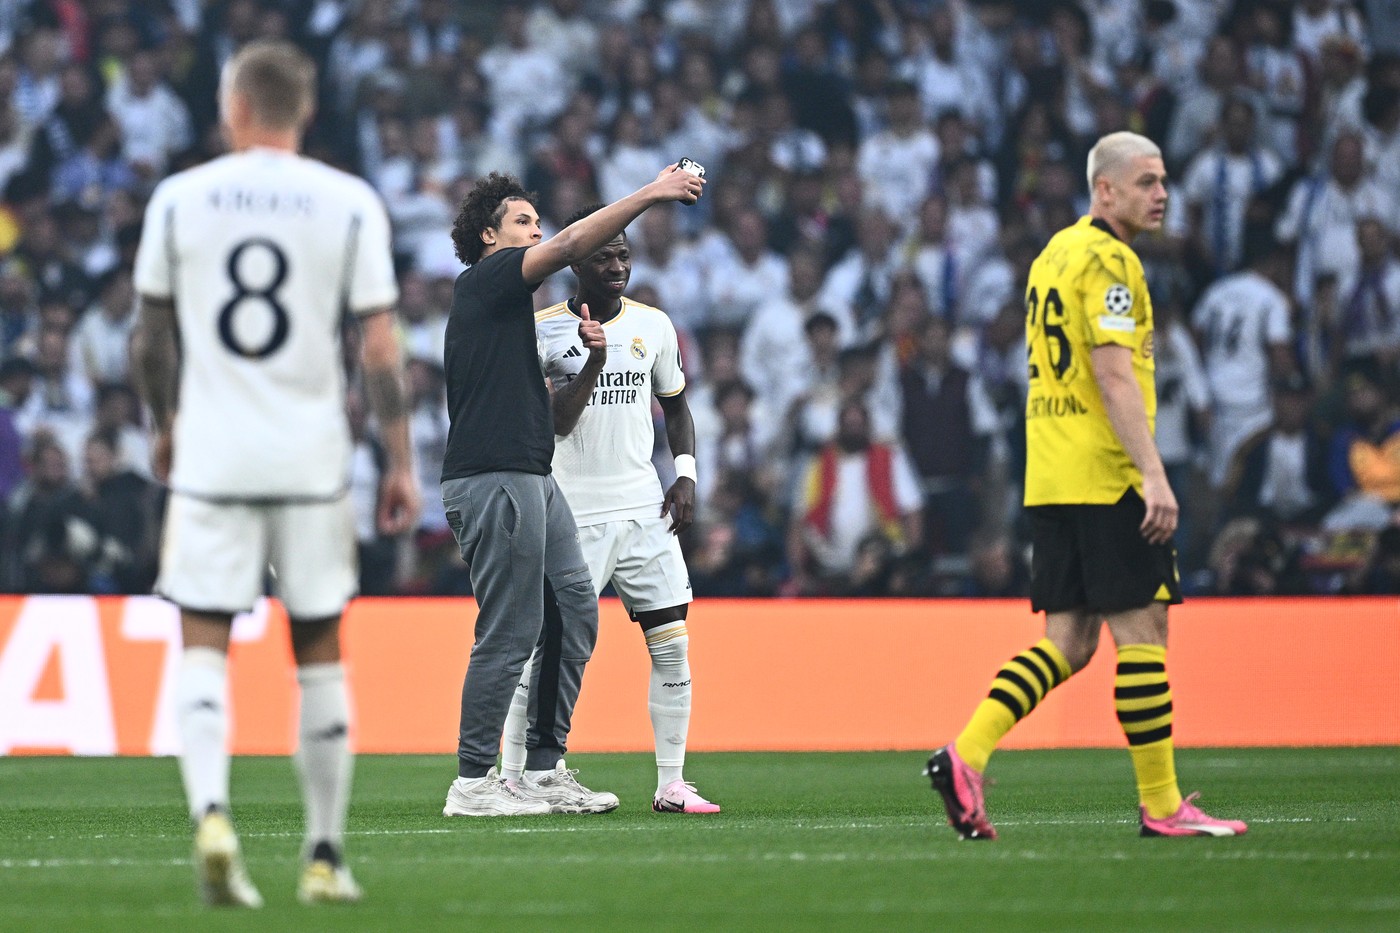 01 June 2024, Great Britain, London: Soccer: Champions League, Borussia Dortmund - Real Madrid, knockout round, final at Wembley Stadium, a streaker takes a selfie with Madrid's Vinicius Junior.,Image: 878171906, License: Rights-managed, Restrictions: , Model Release: no